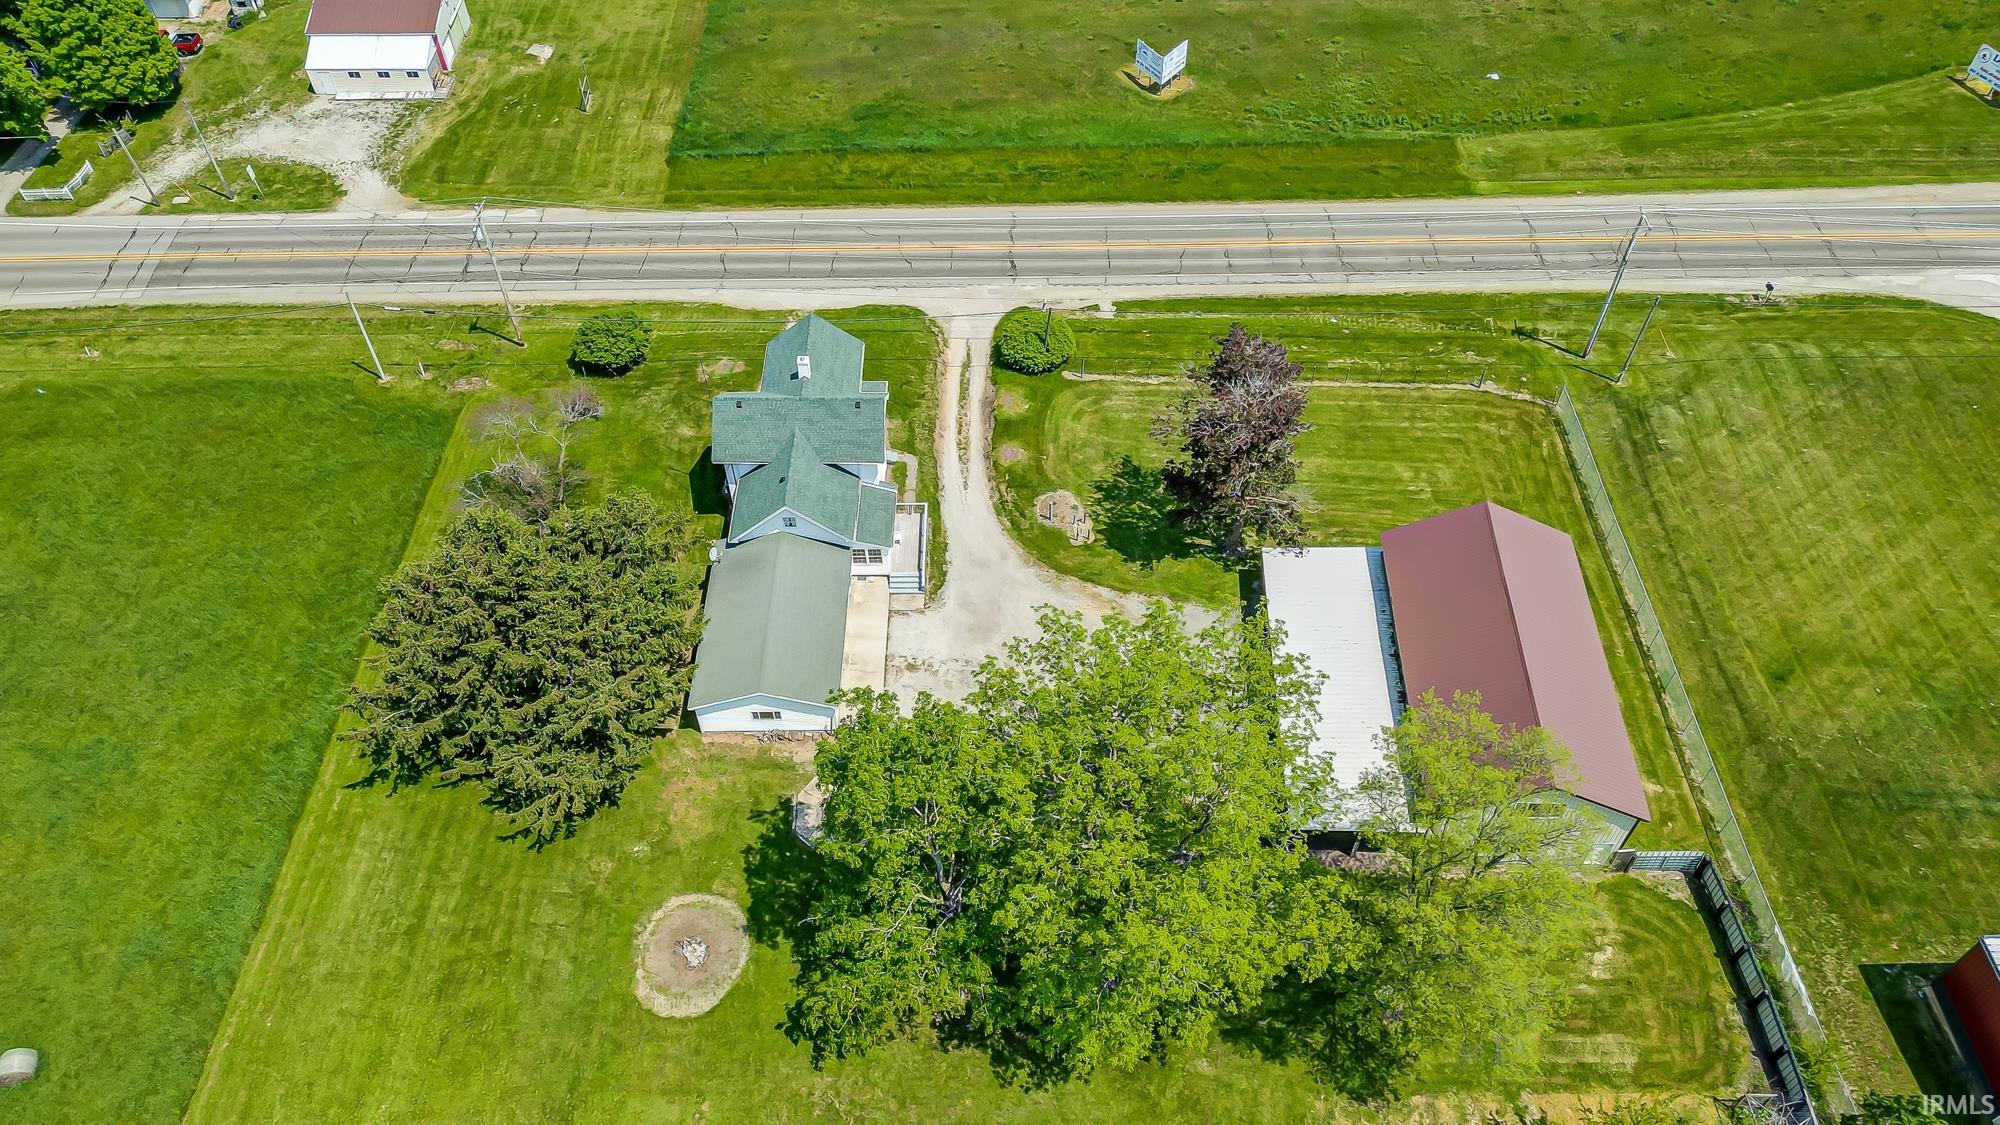 11401 N State Road 9 57 Road, Wolcottville, IN 46795